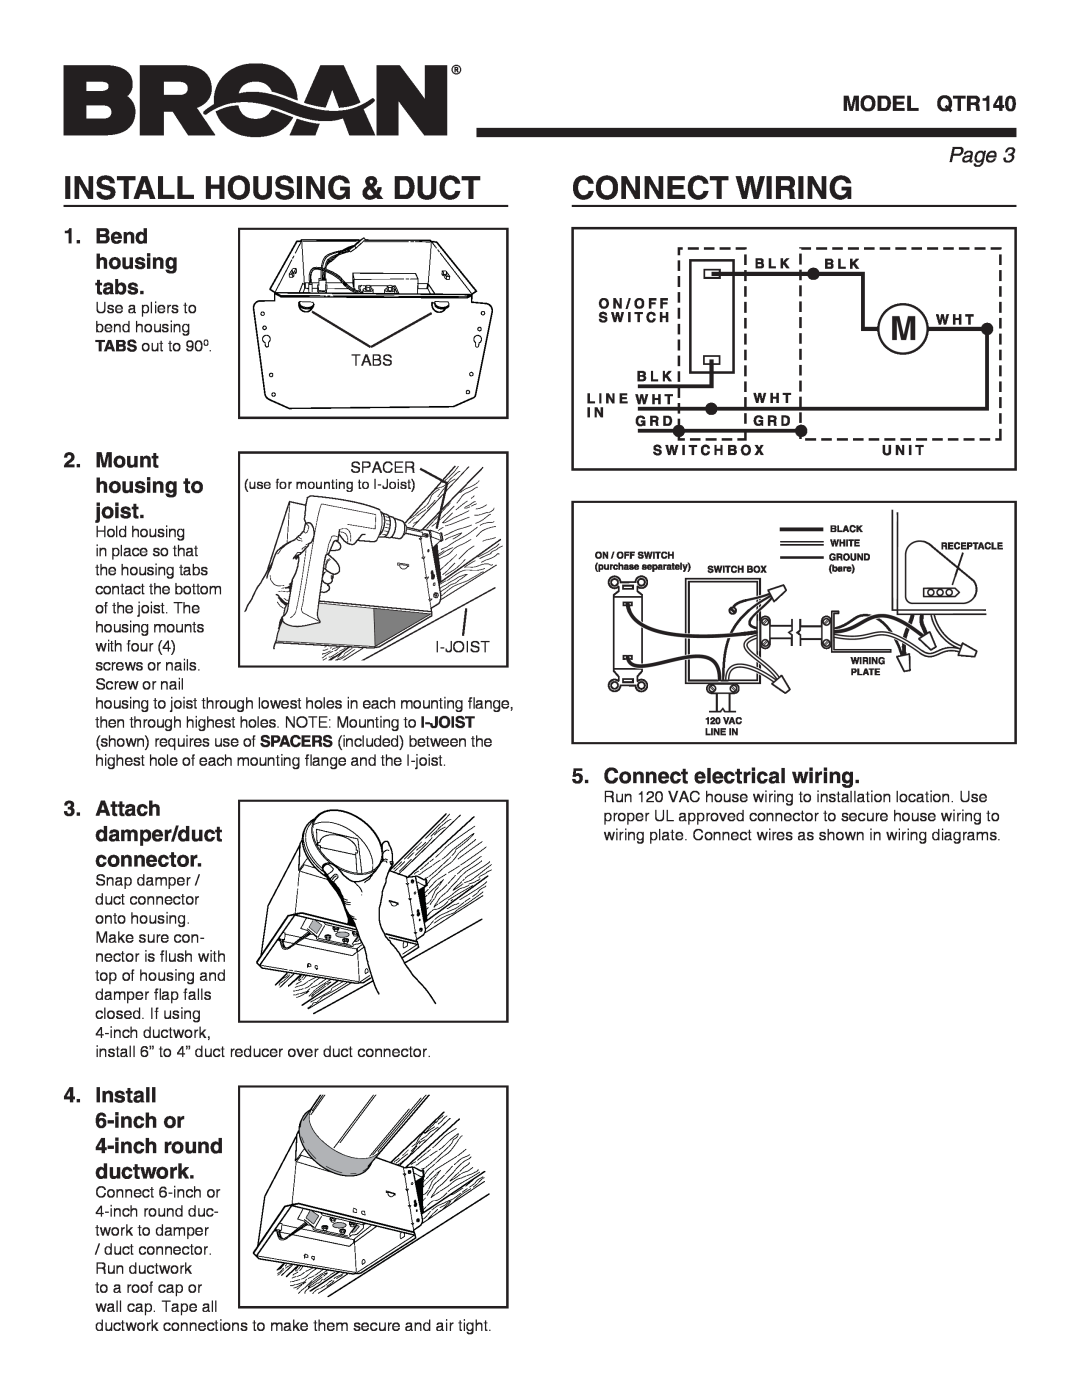 Broan QTR140 Install Housing & Duct, Connect Wiring, Bend, tabs, Mount, housing to, joist, Connect electrical wiring 